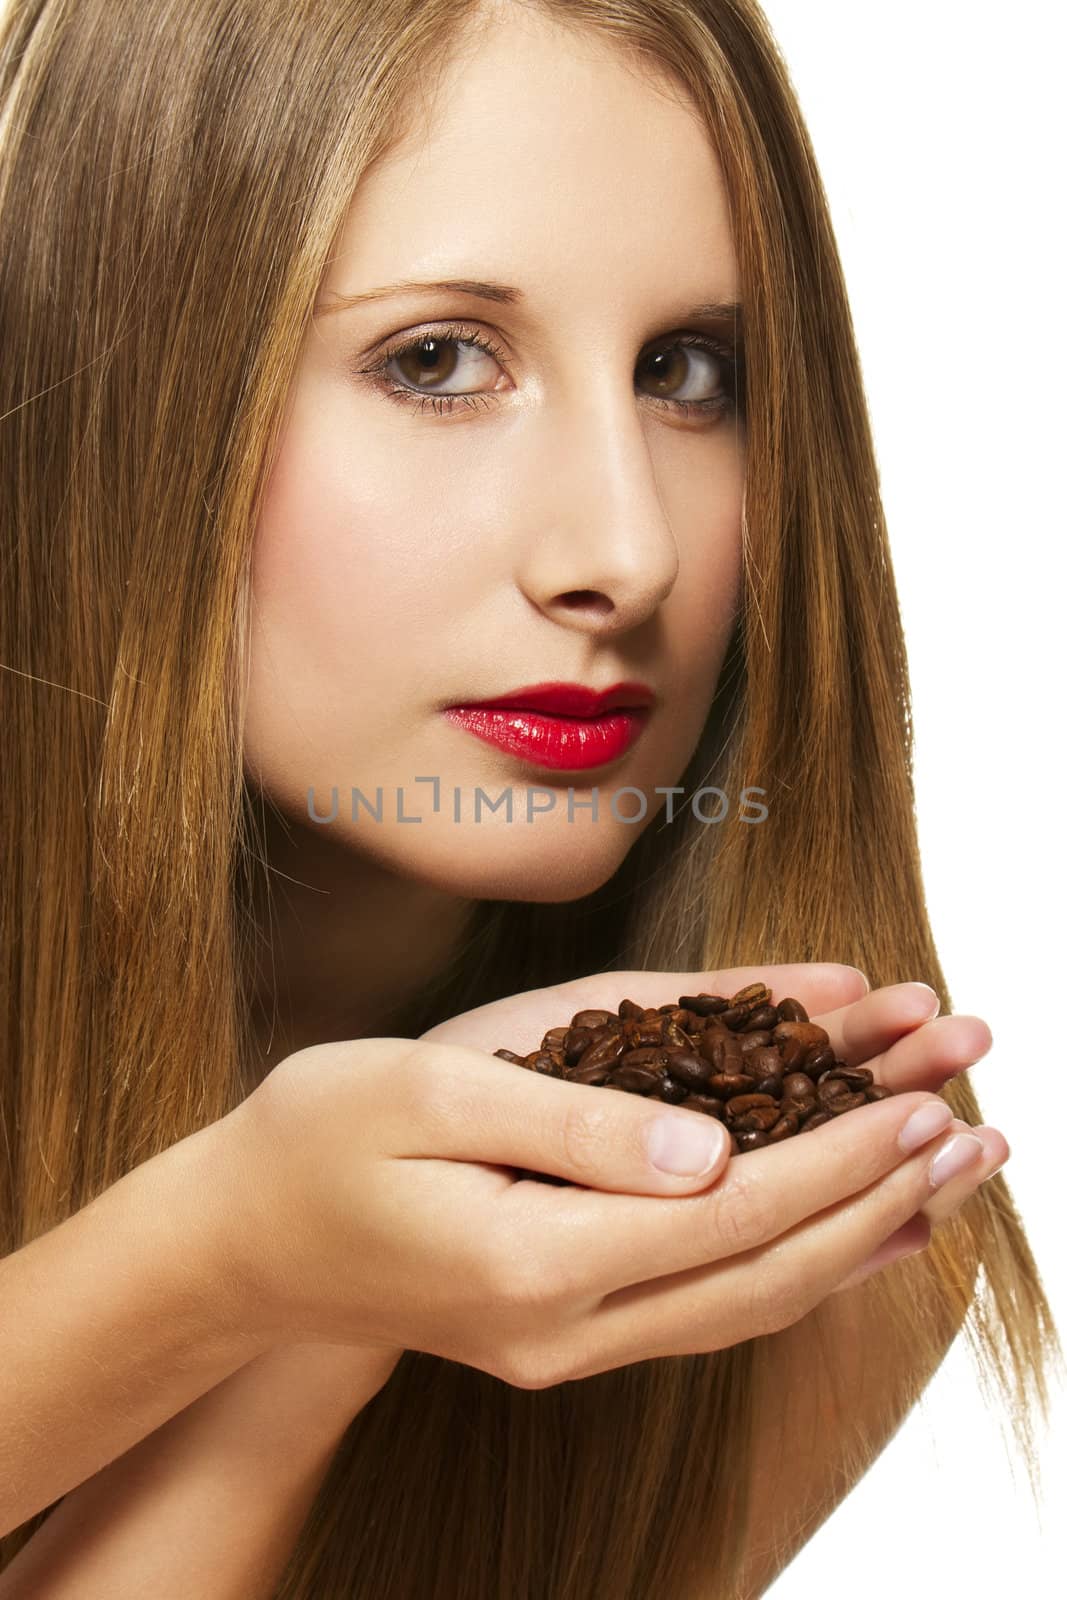 beautiful woman holding coffee beans in her hands on white background